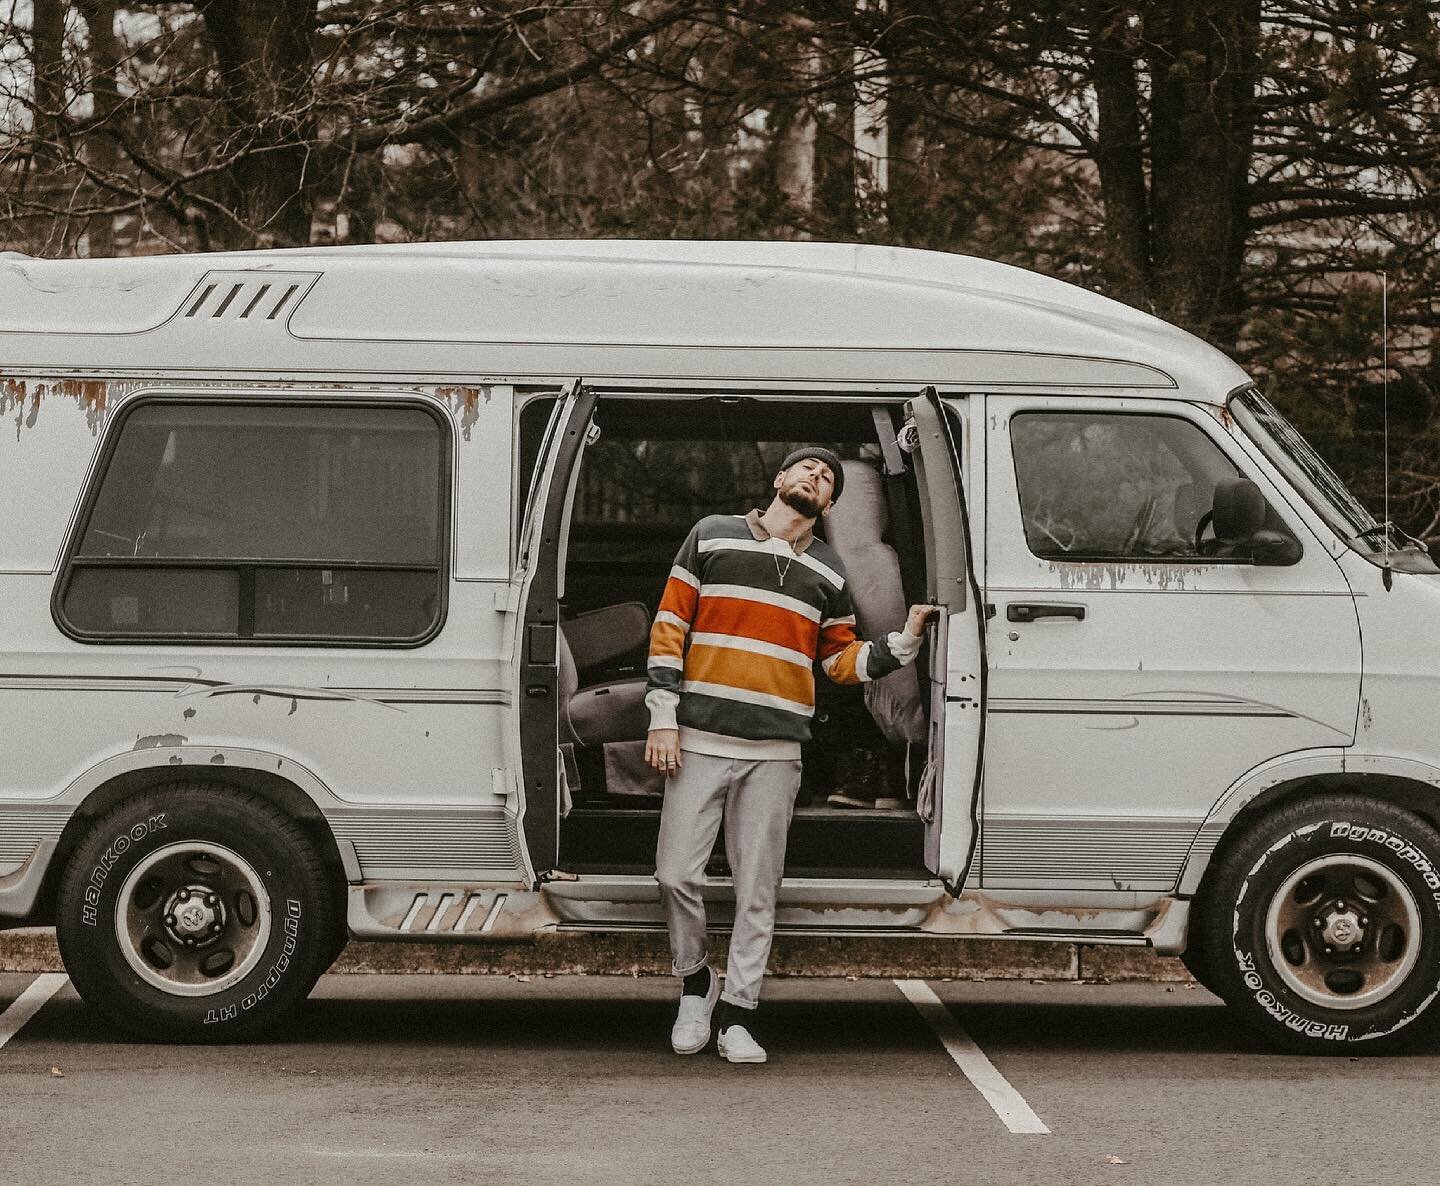 I sold my old tour van 😭 I put over 100k miles and saw a lot of the country over the years. We called her &ldquo;WHALETIME&rdquo; (whole other story) it had the most comfortable seats, perfect for playing Mario cart on the 10in screen. Sad to let he